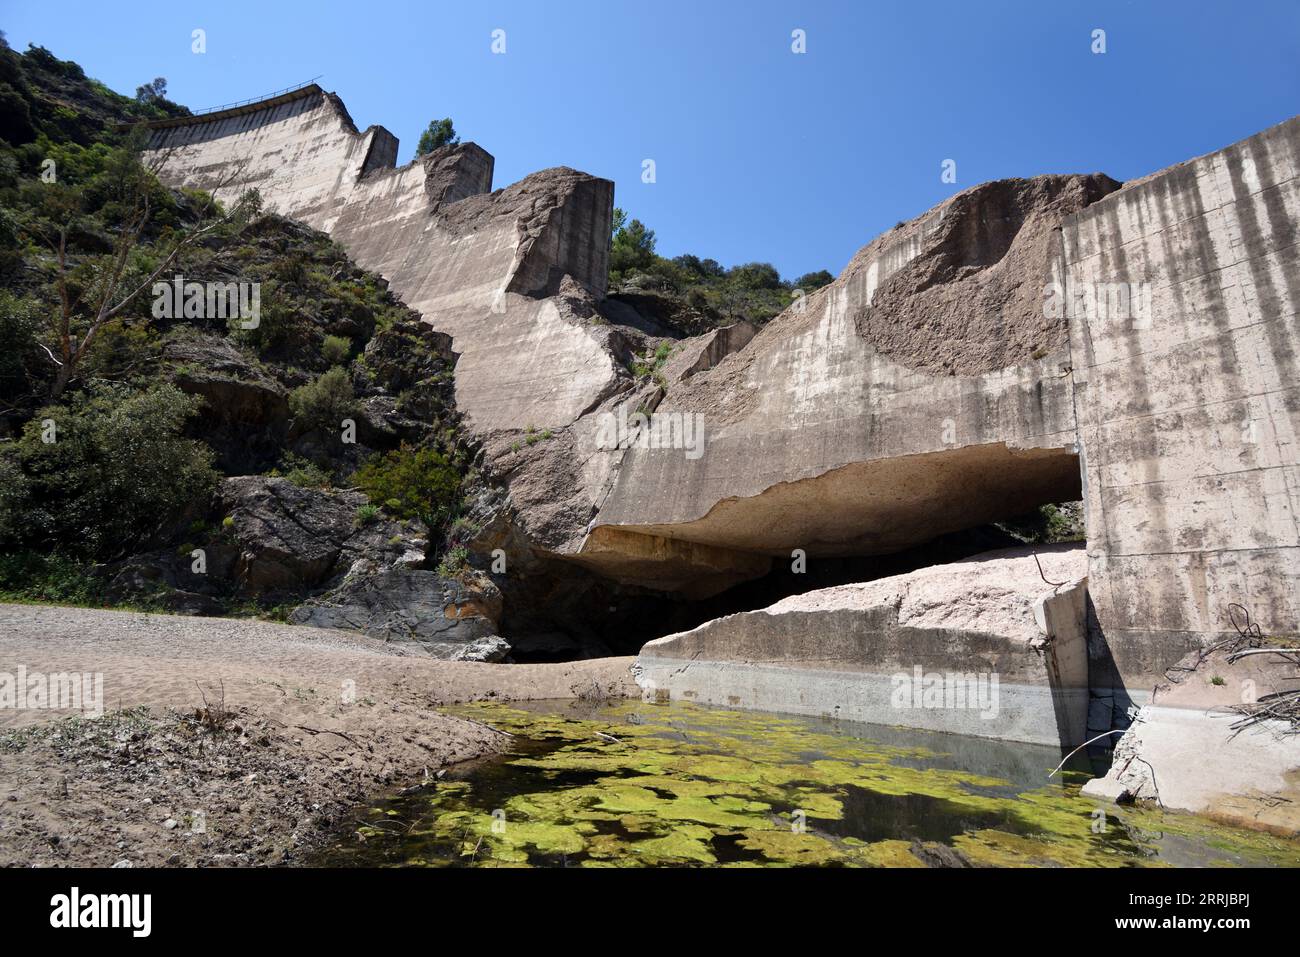 Ruined Barrage or Dam of Malpasset on River Reyran which Collapsed in the Dam Disaster of 1959 Killing 423 People Frejus Var Provence France Stock Photo